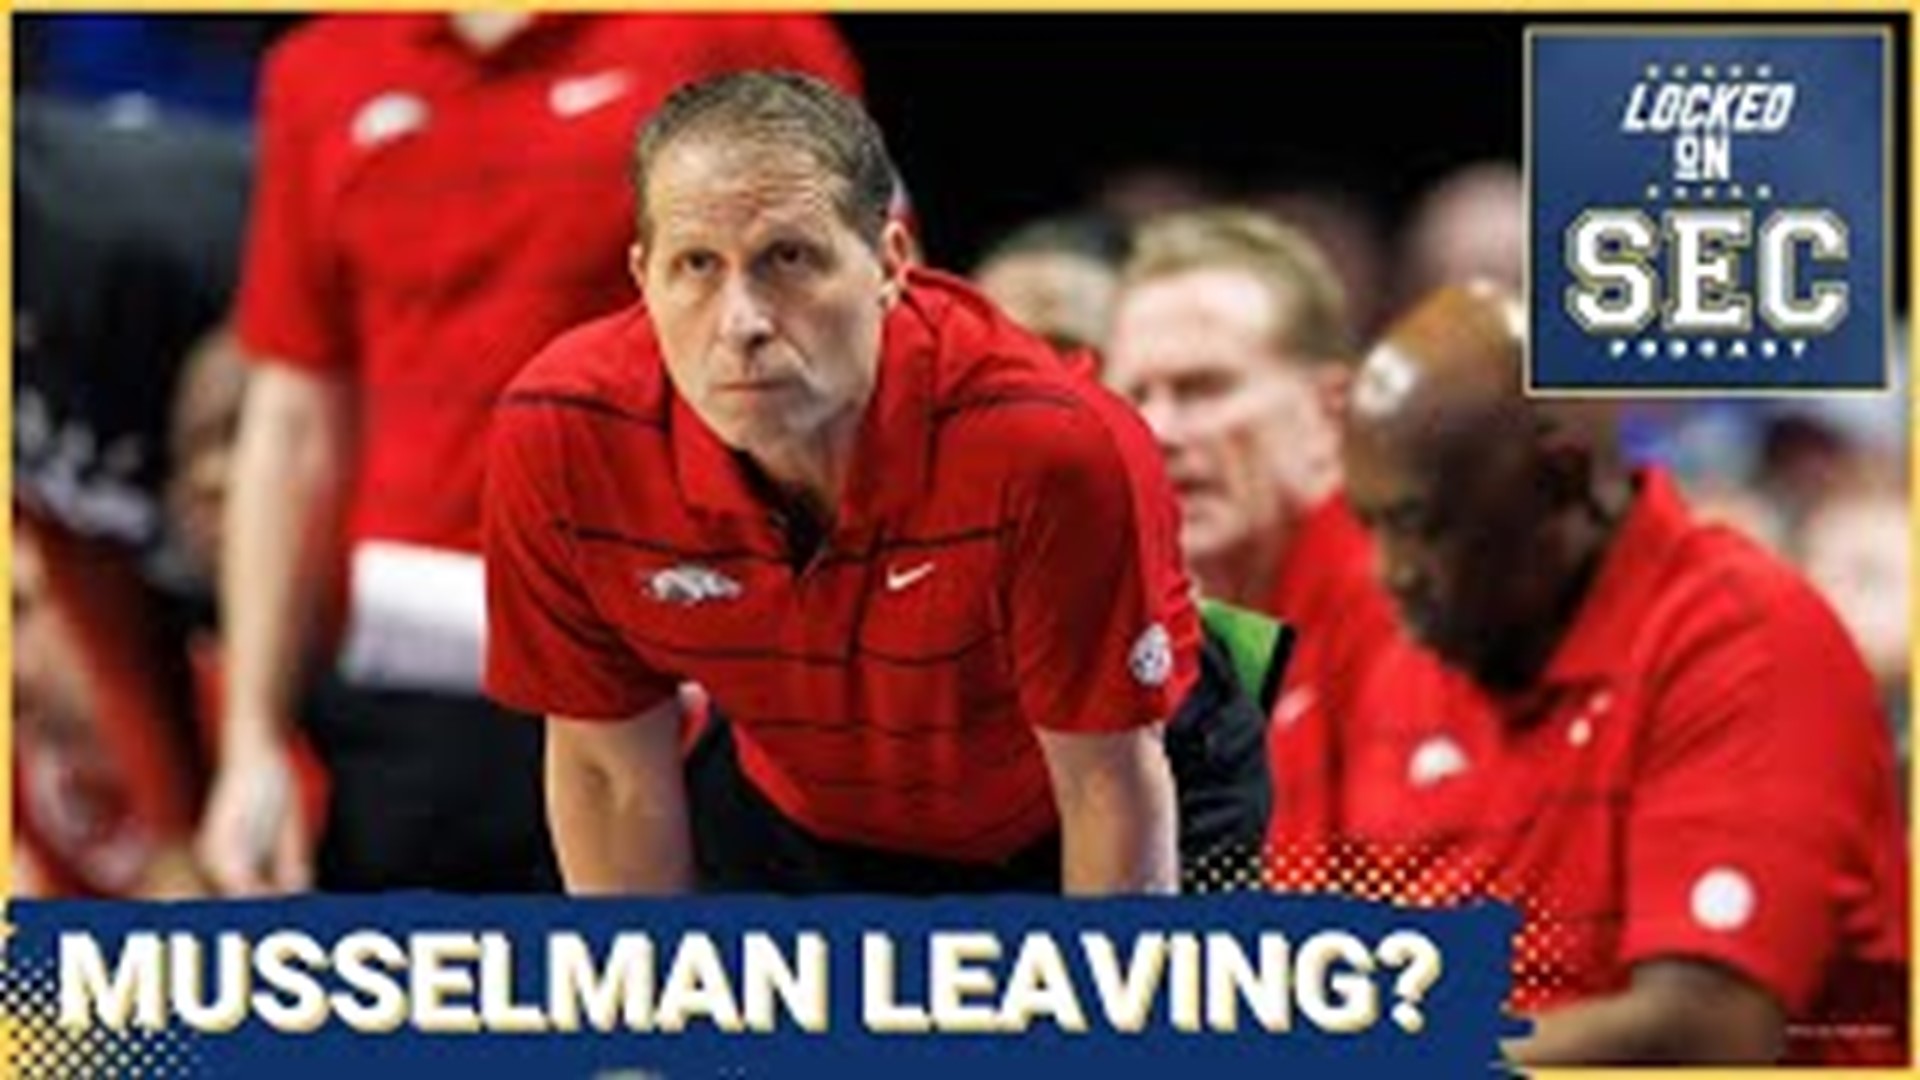 On today's show, we hit on the latest news that Eric Musselman is interviewing for the USC Trojans job and could be leaving Fayetteville for Southern Cal.